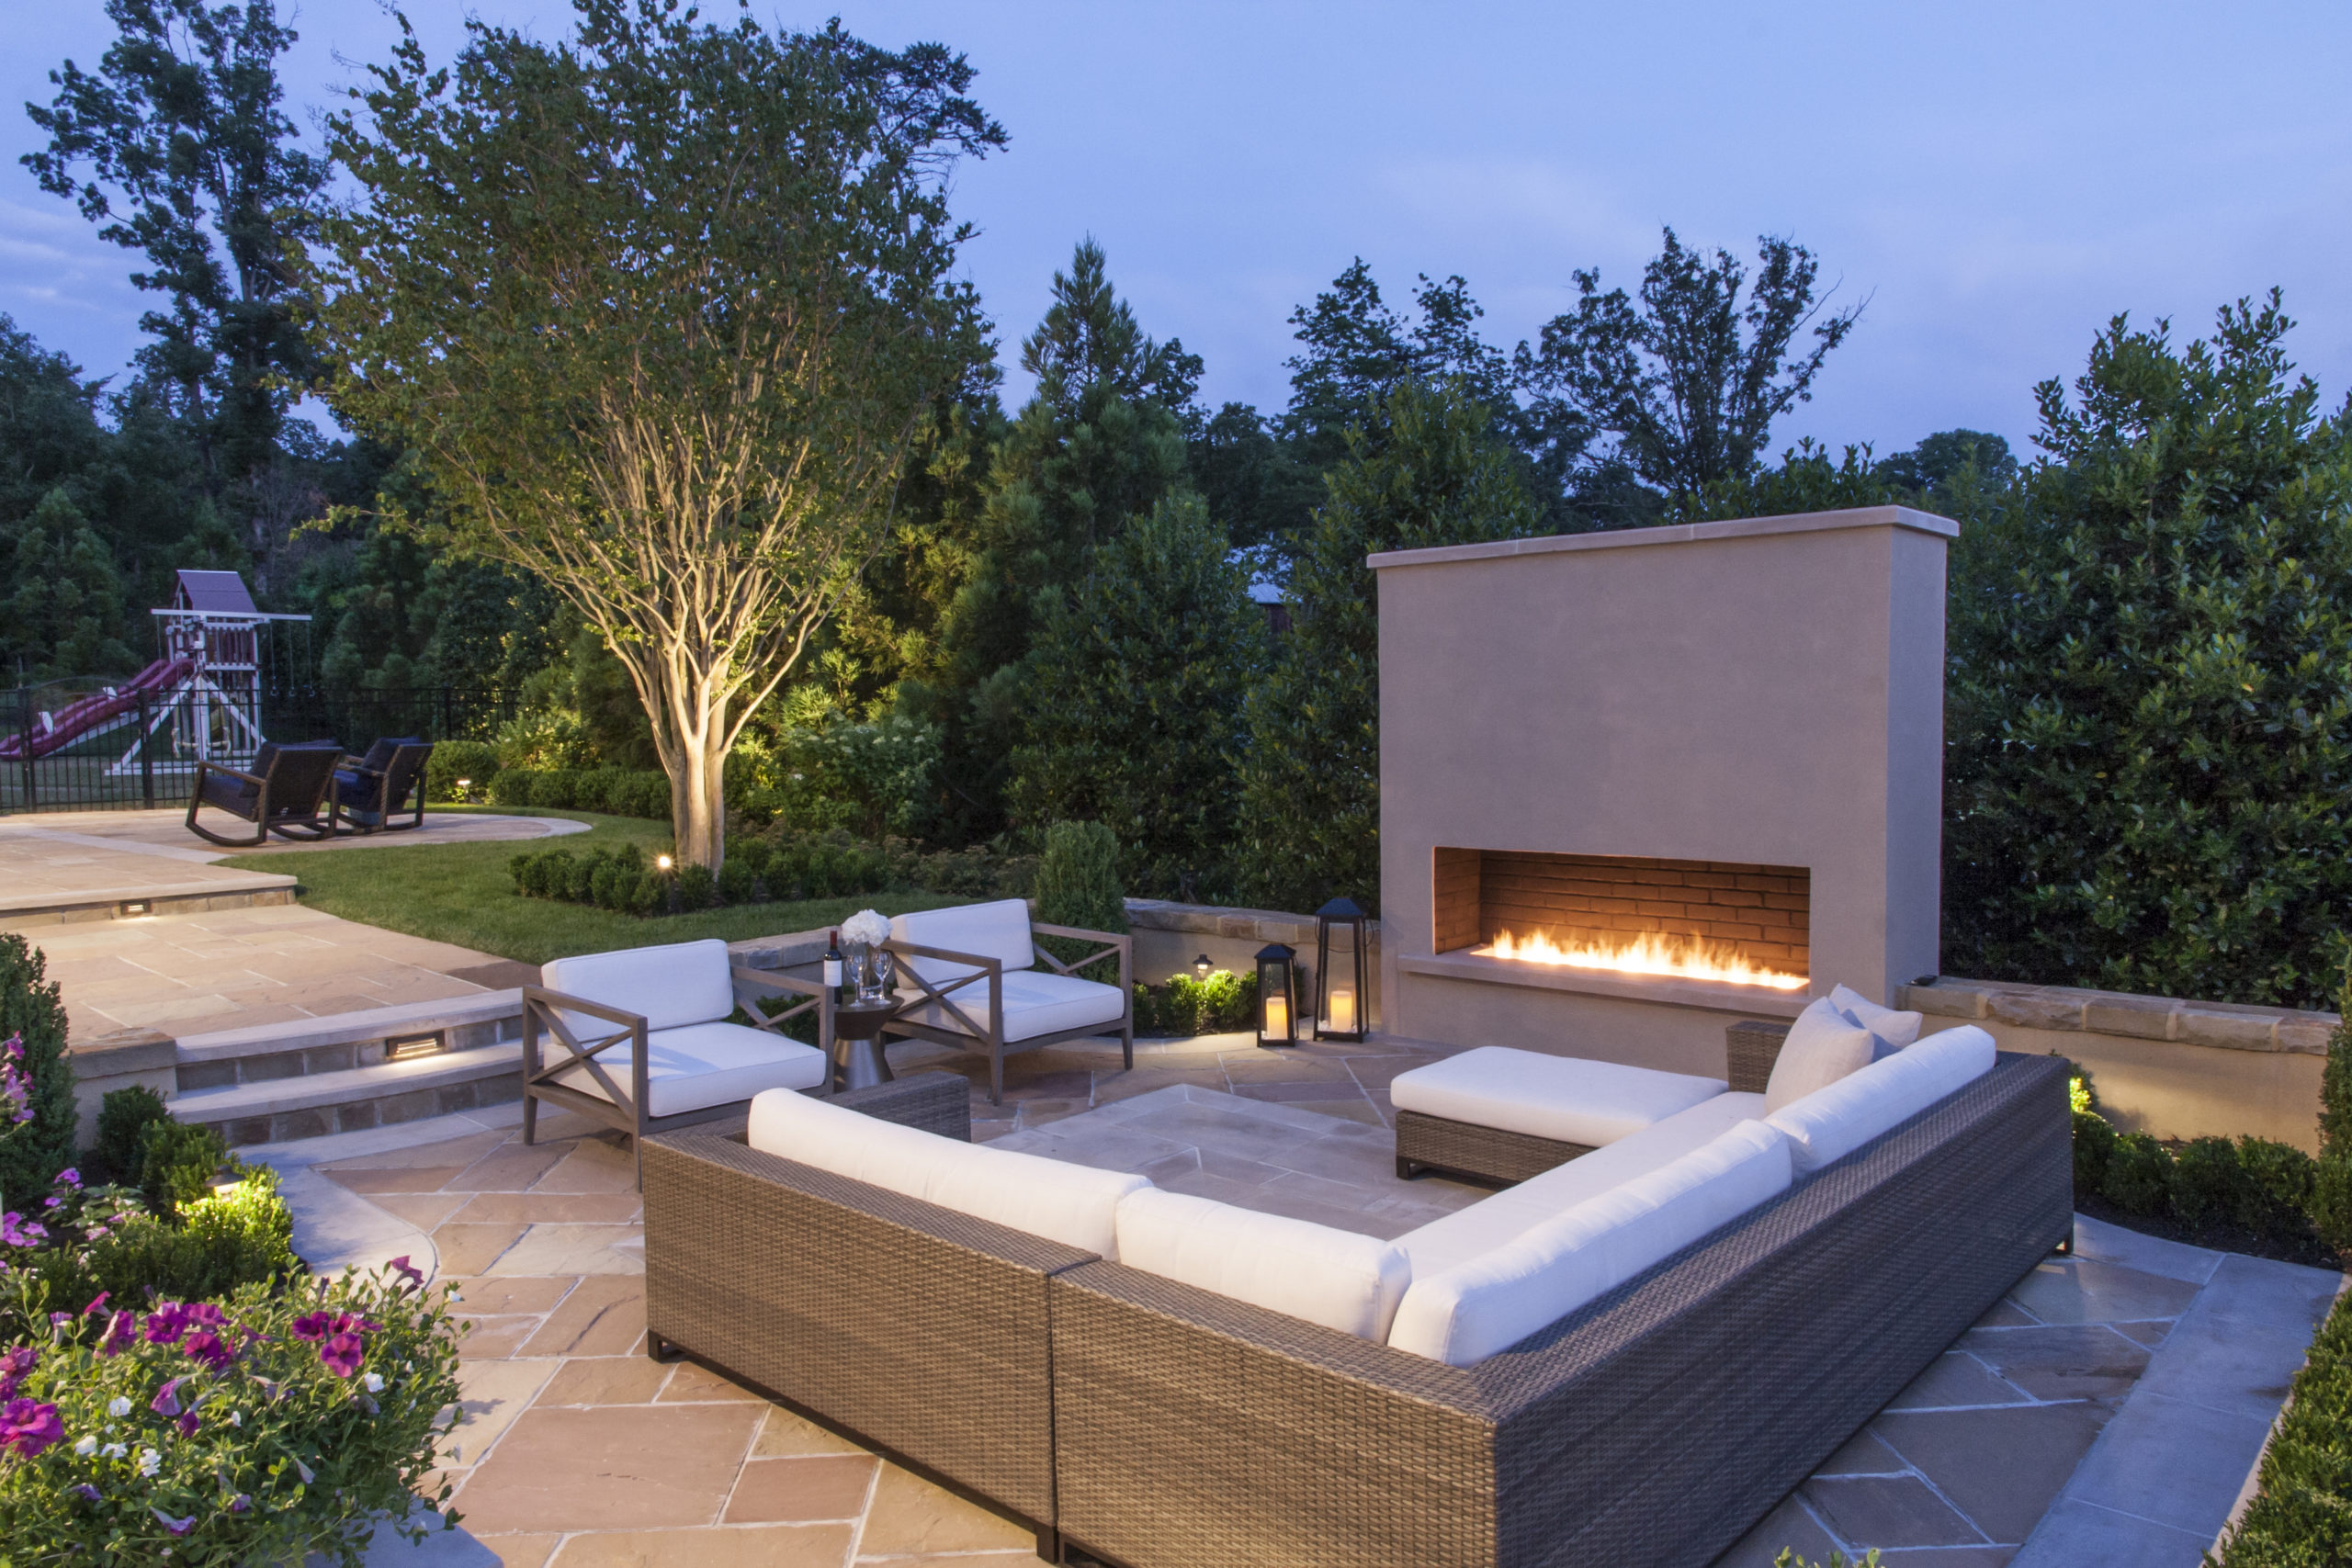 Custom outdoor fireplace surrounded by patio furniture